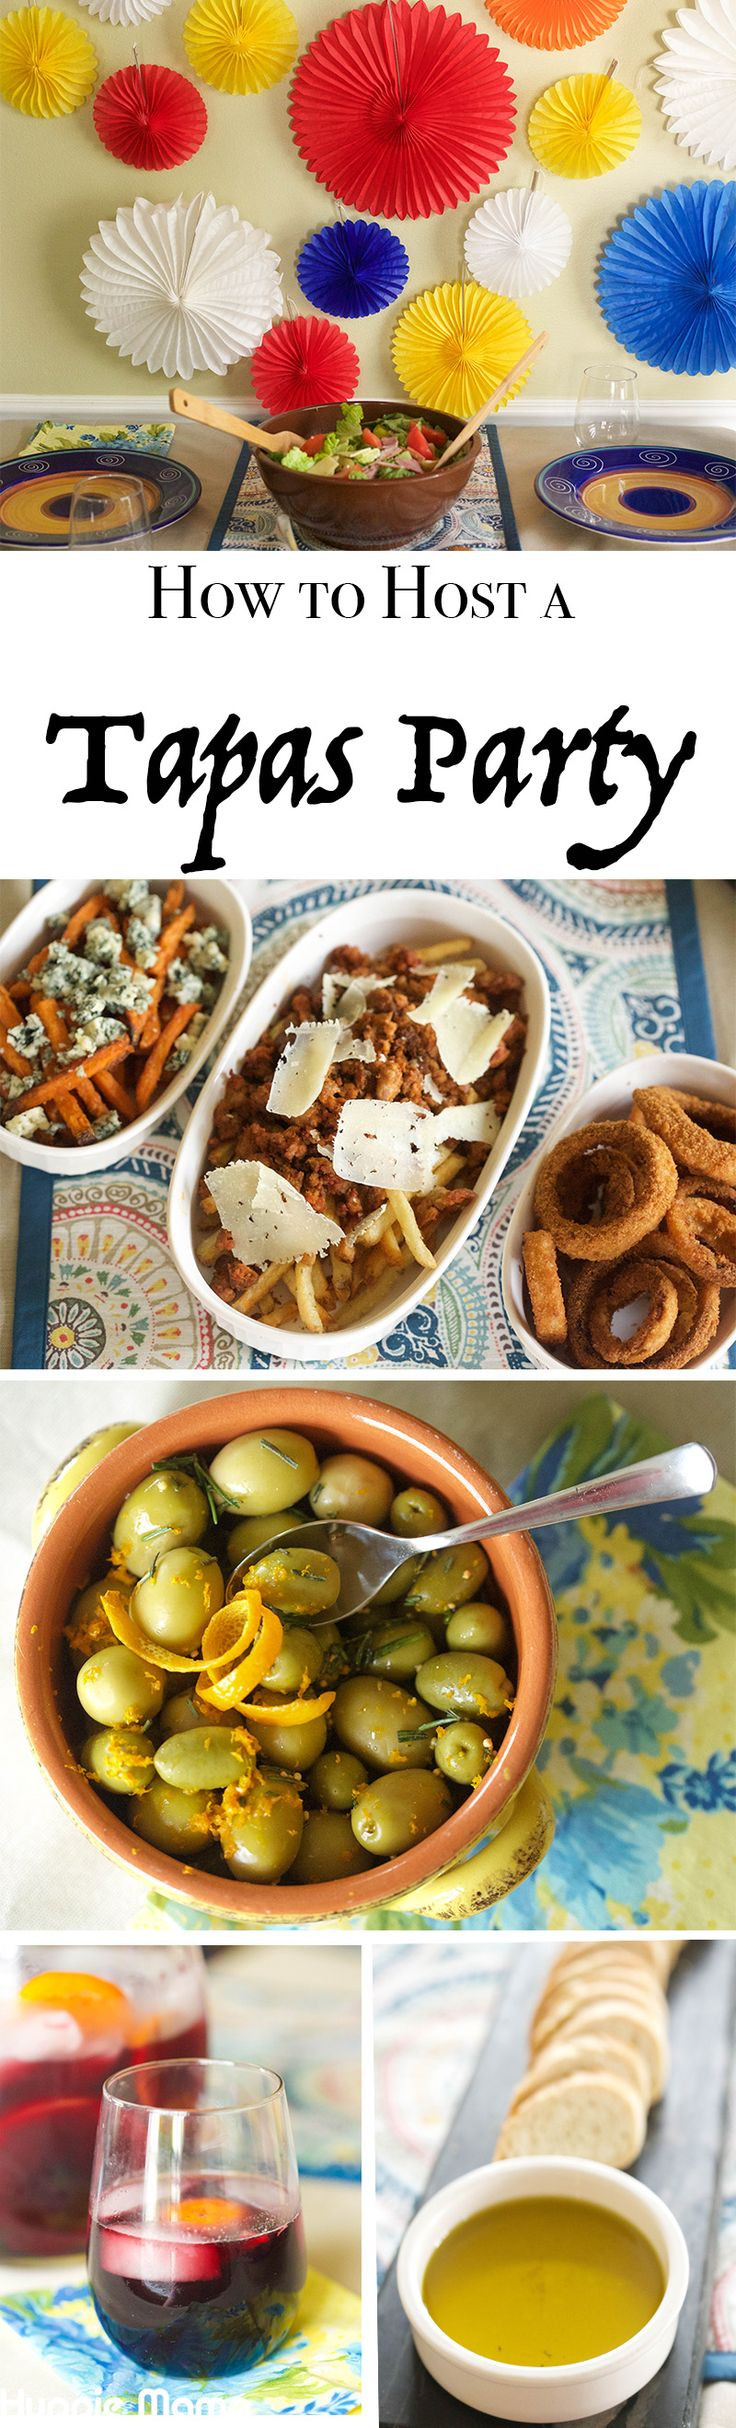 Tapas Ideas For Dinner Party
 1000 ideas about Dinner Themes on Pinterest